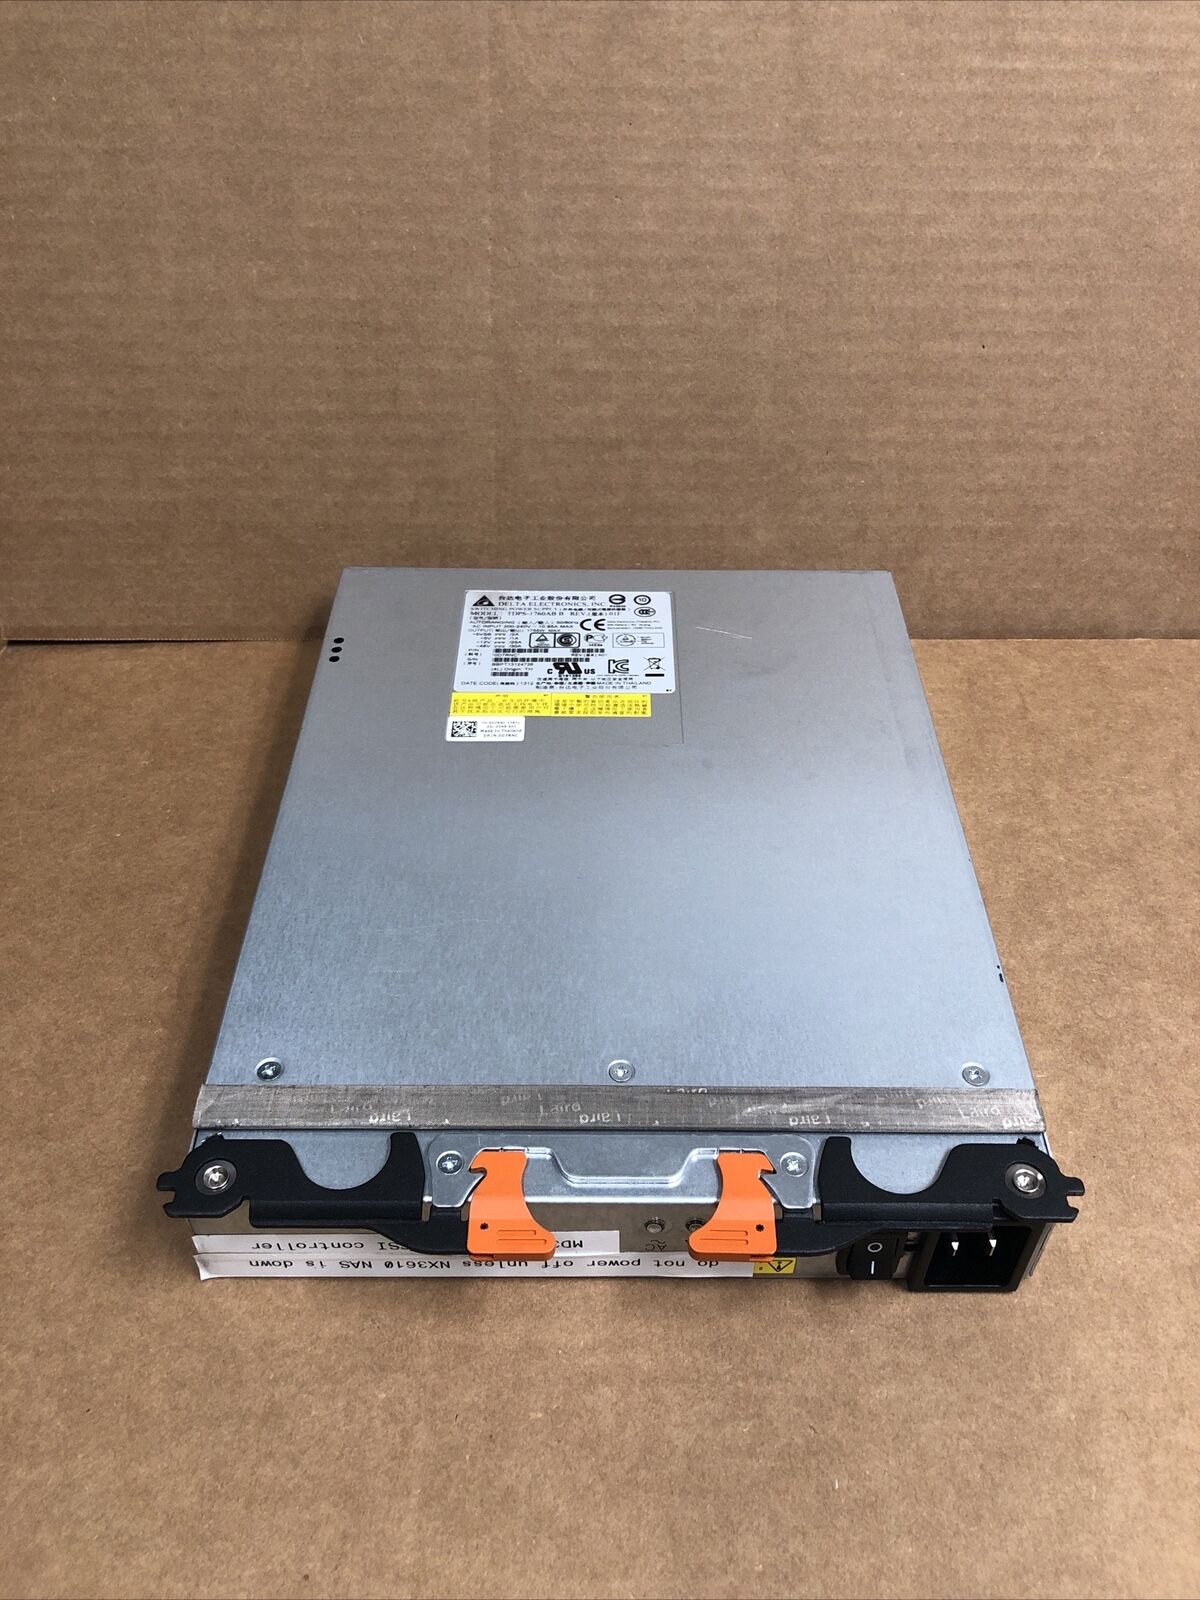 +Dell MD3660i 1755W Power Supply - 0D7RNC